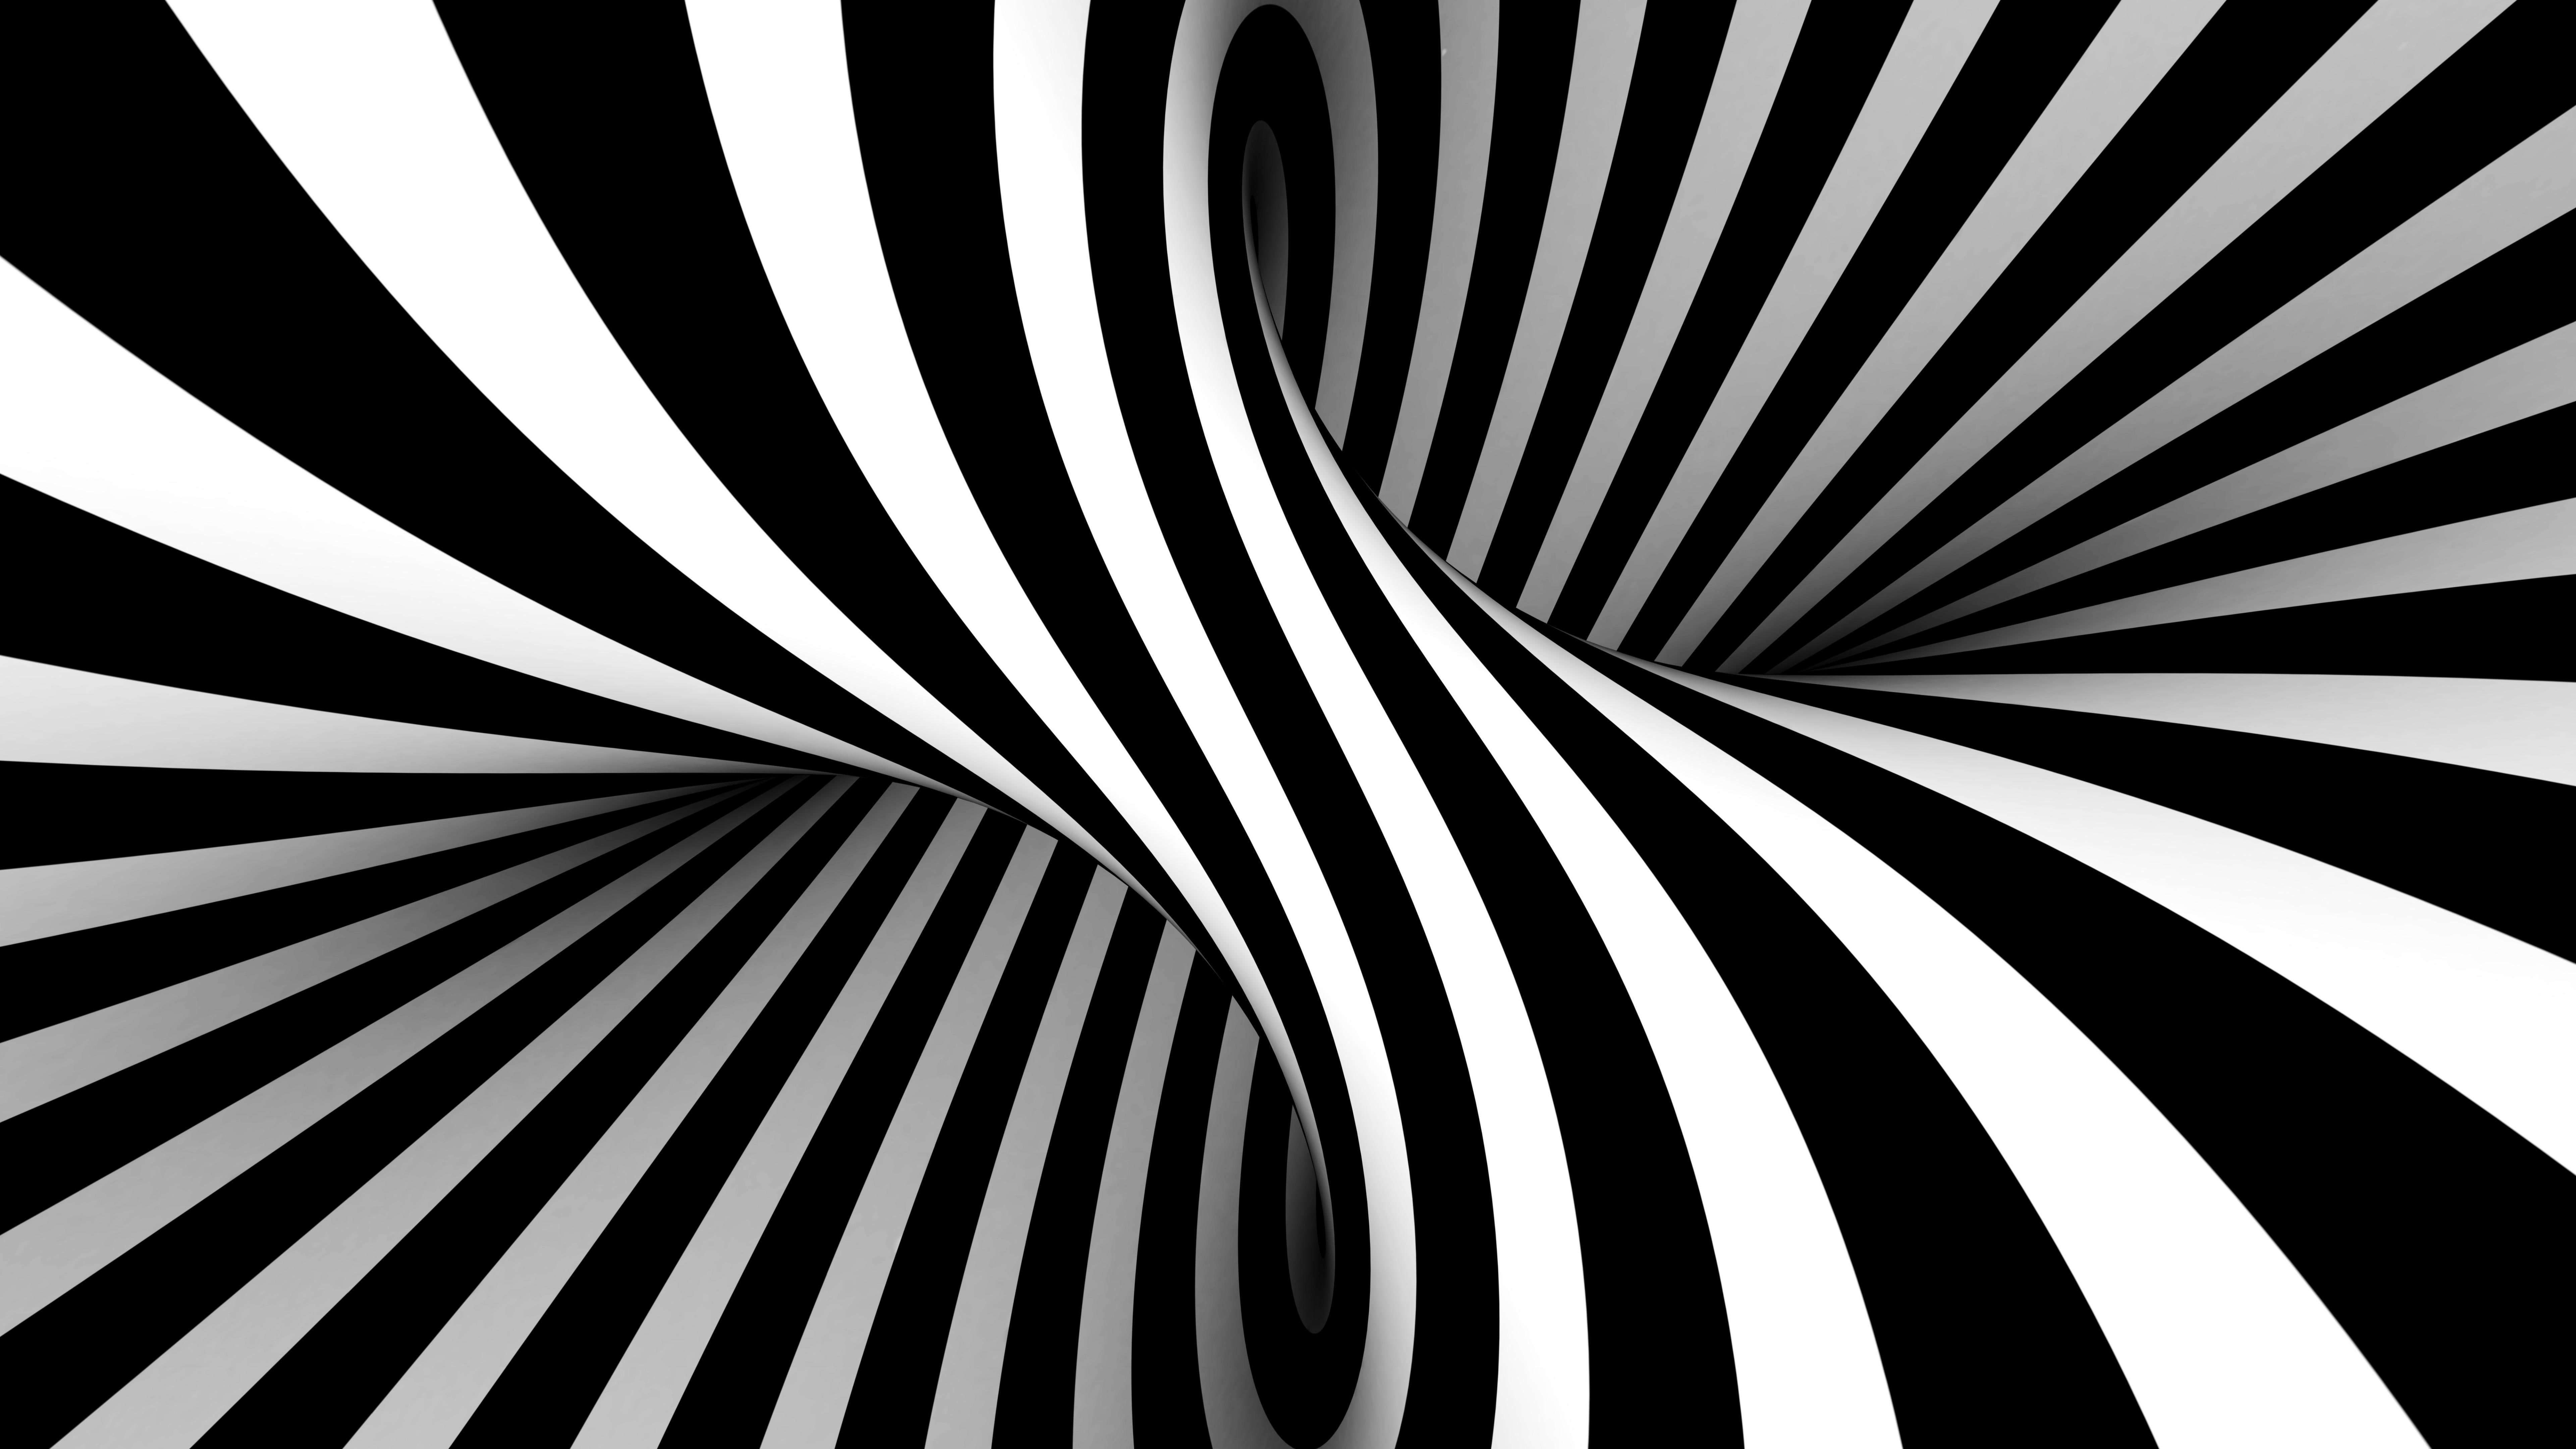 Free download | HD wallpaper: optical illusion, black and white, lines ...